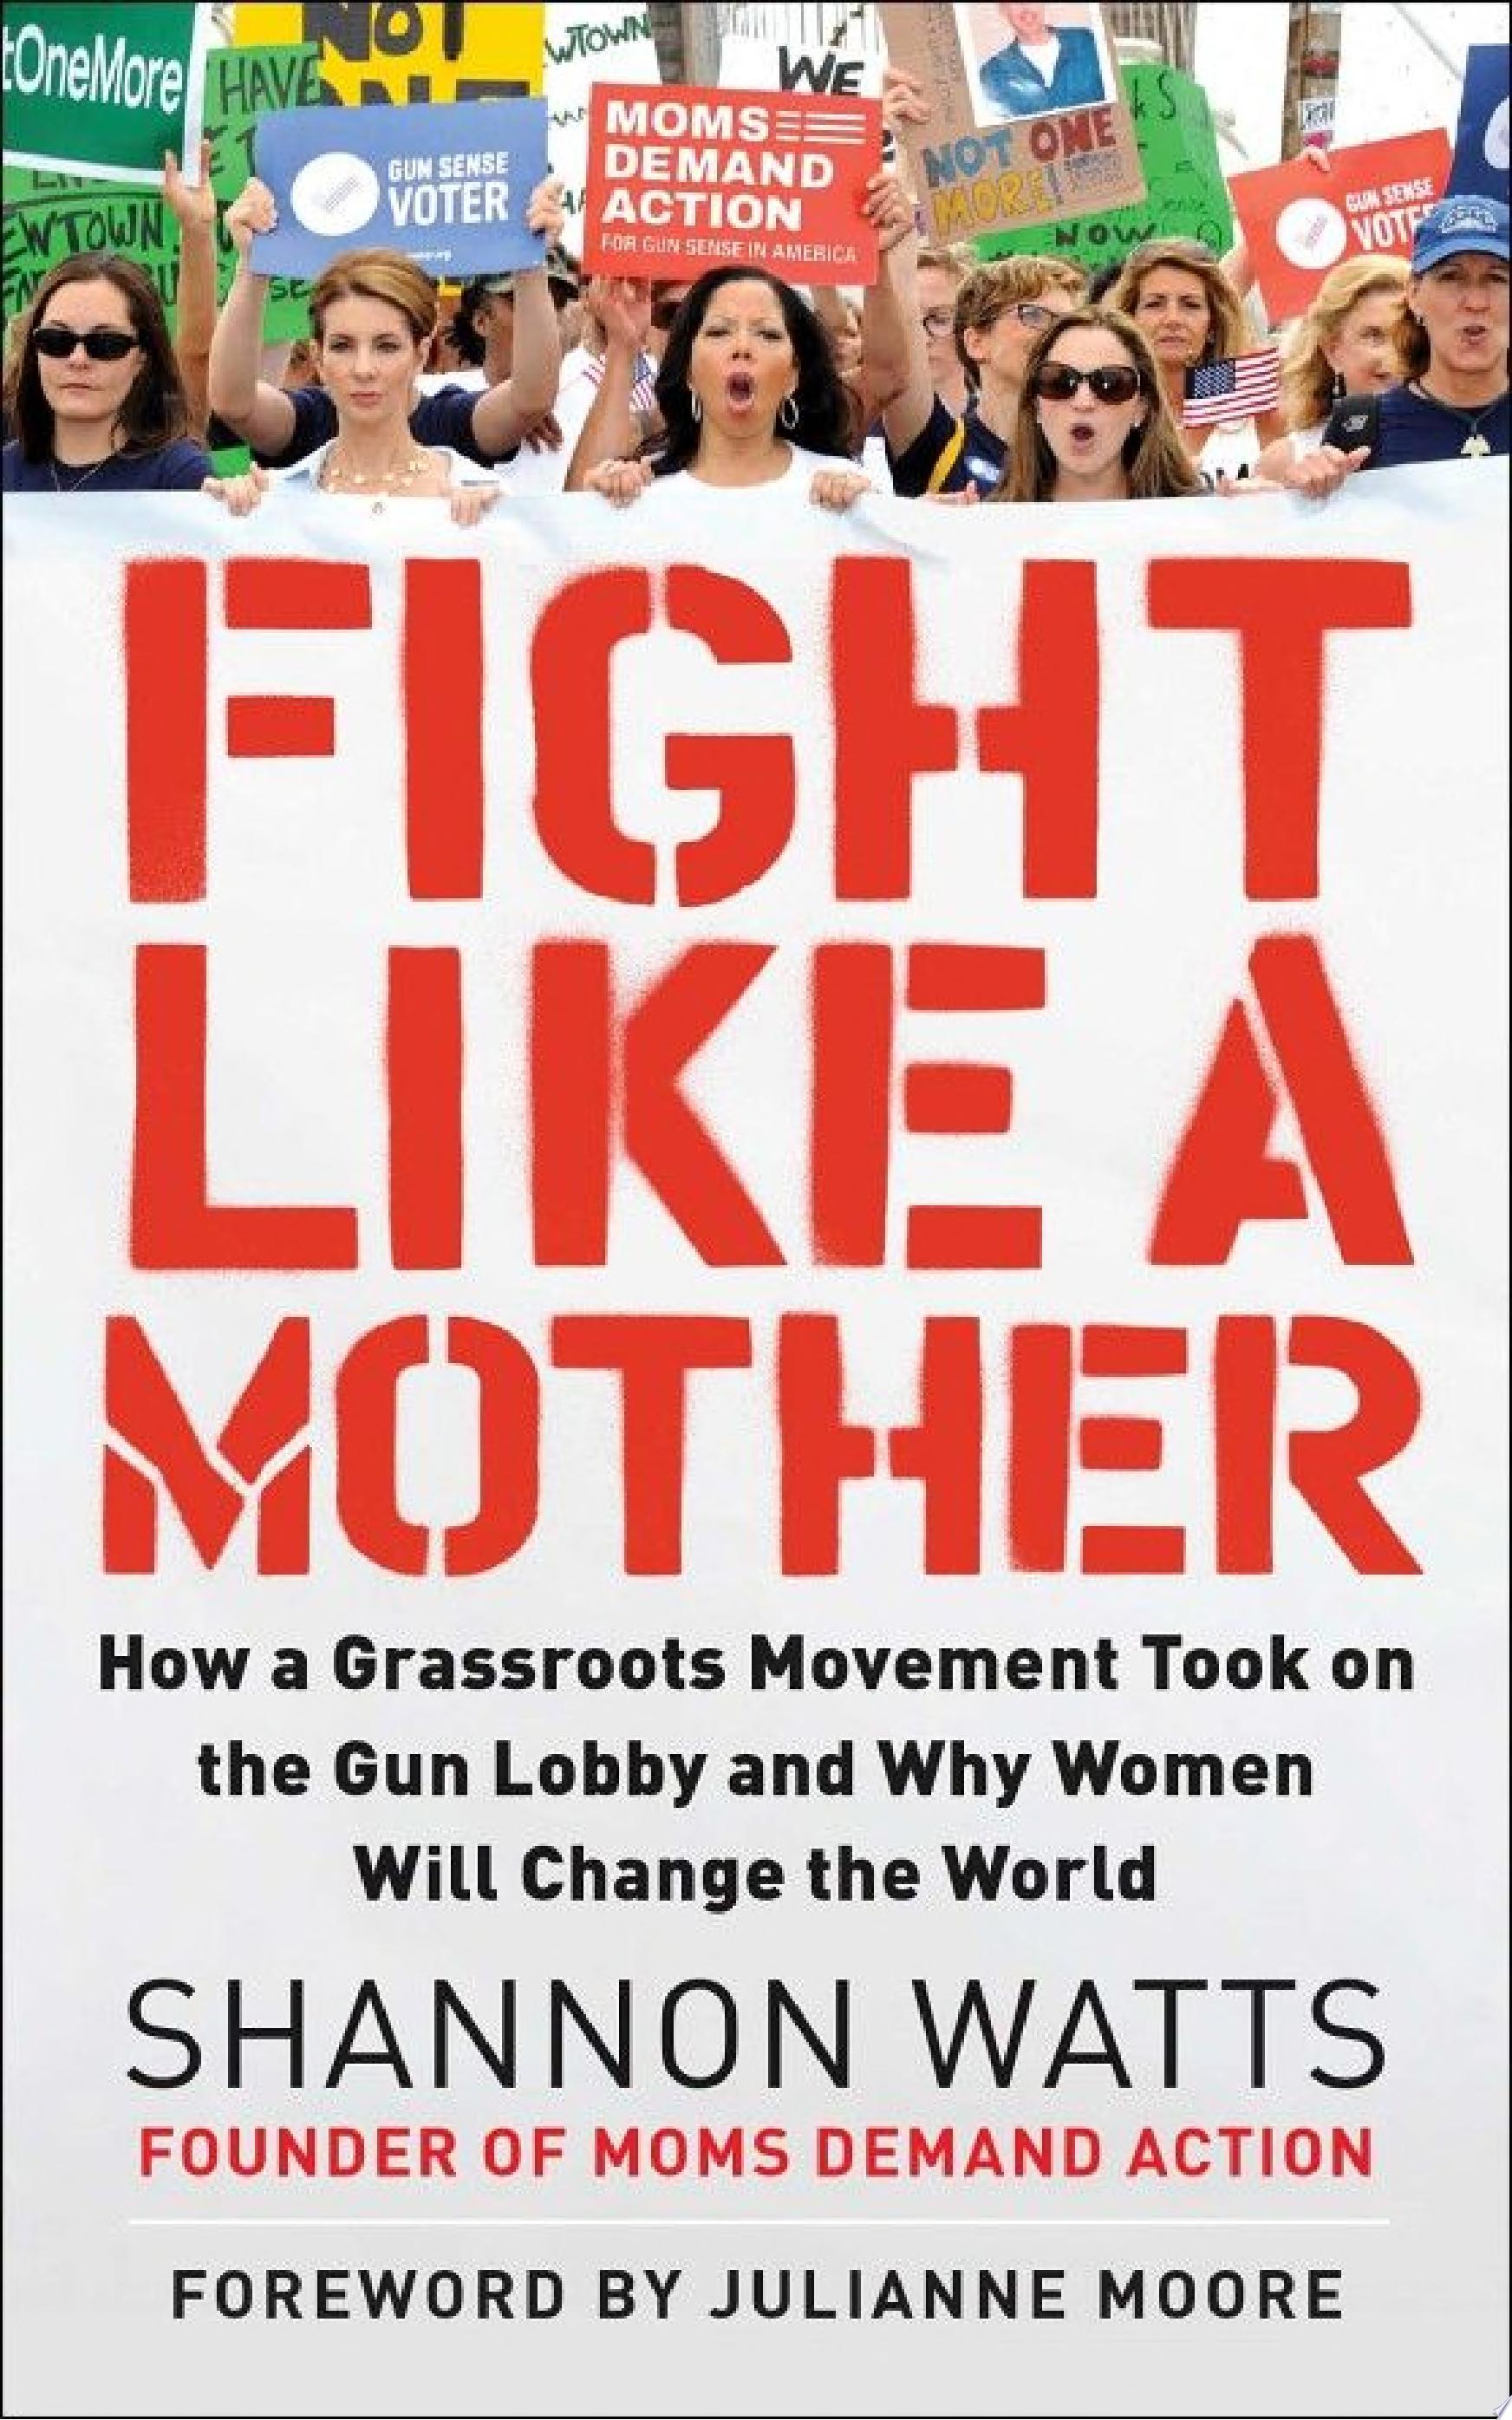 Image for "Fight Like a Mother"